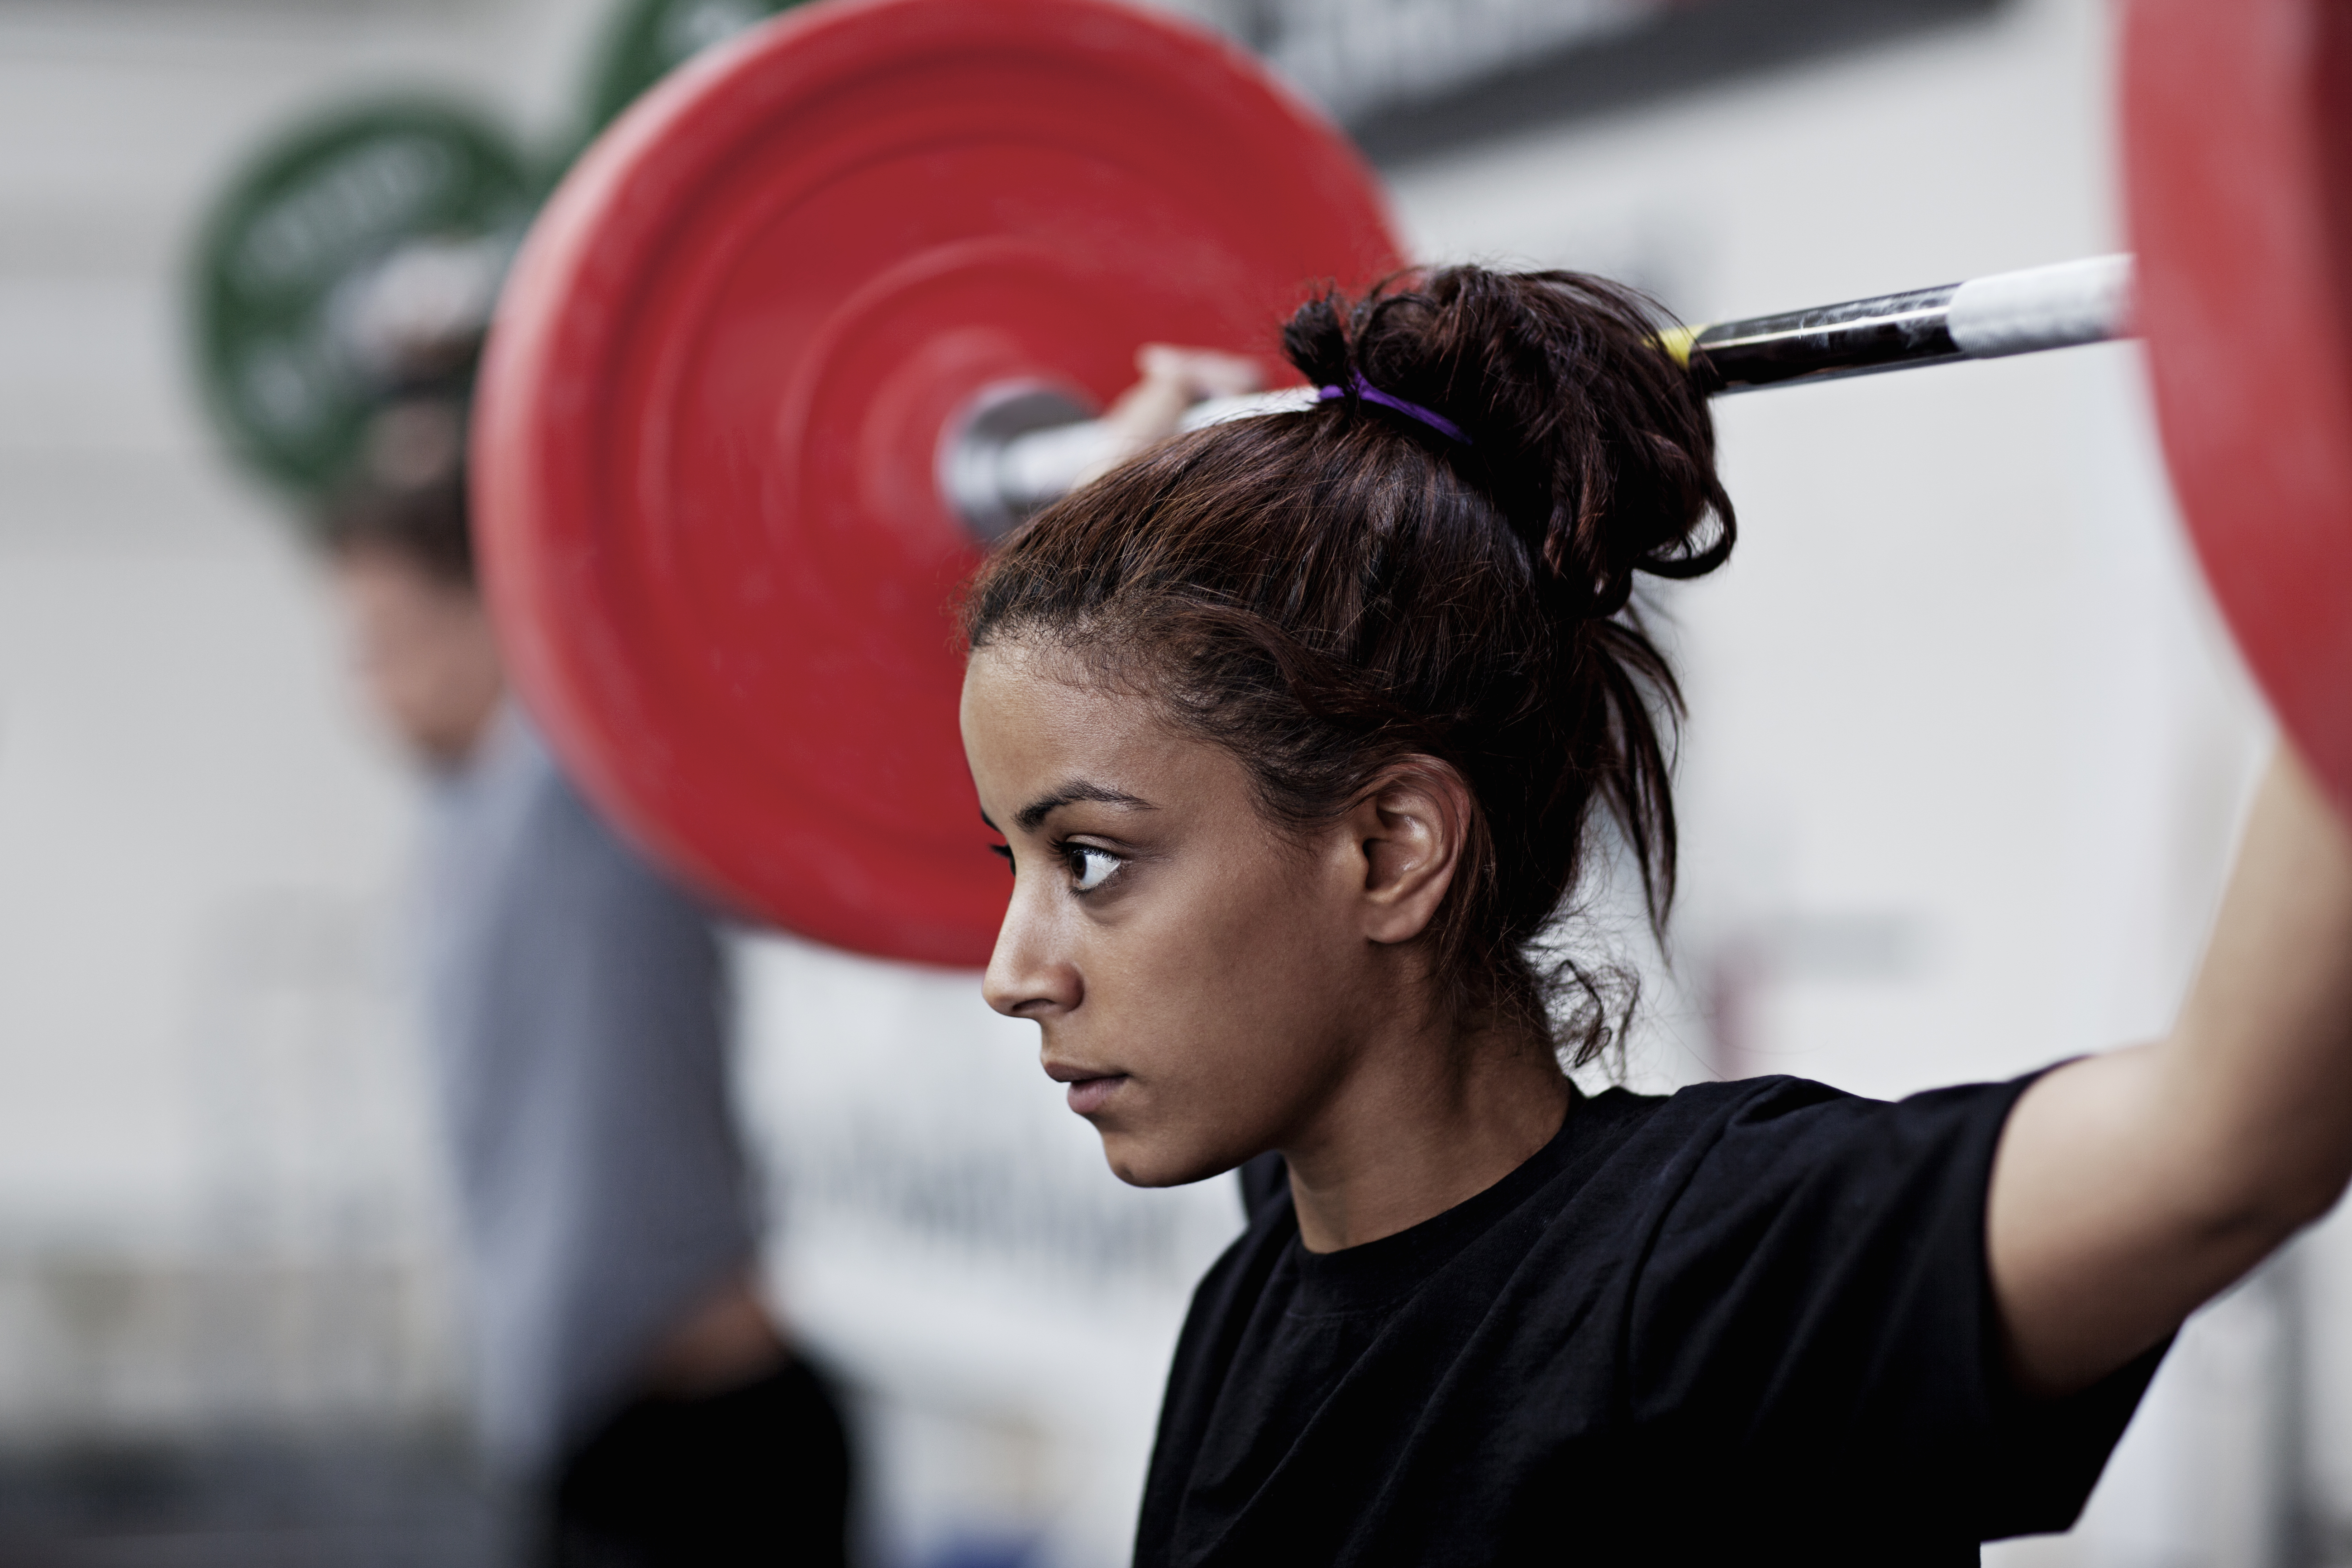 Does Lifting Heavy Weights Hurt Your Heart?